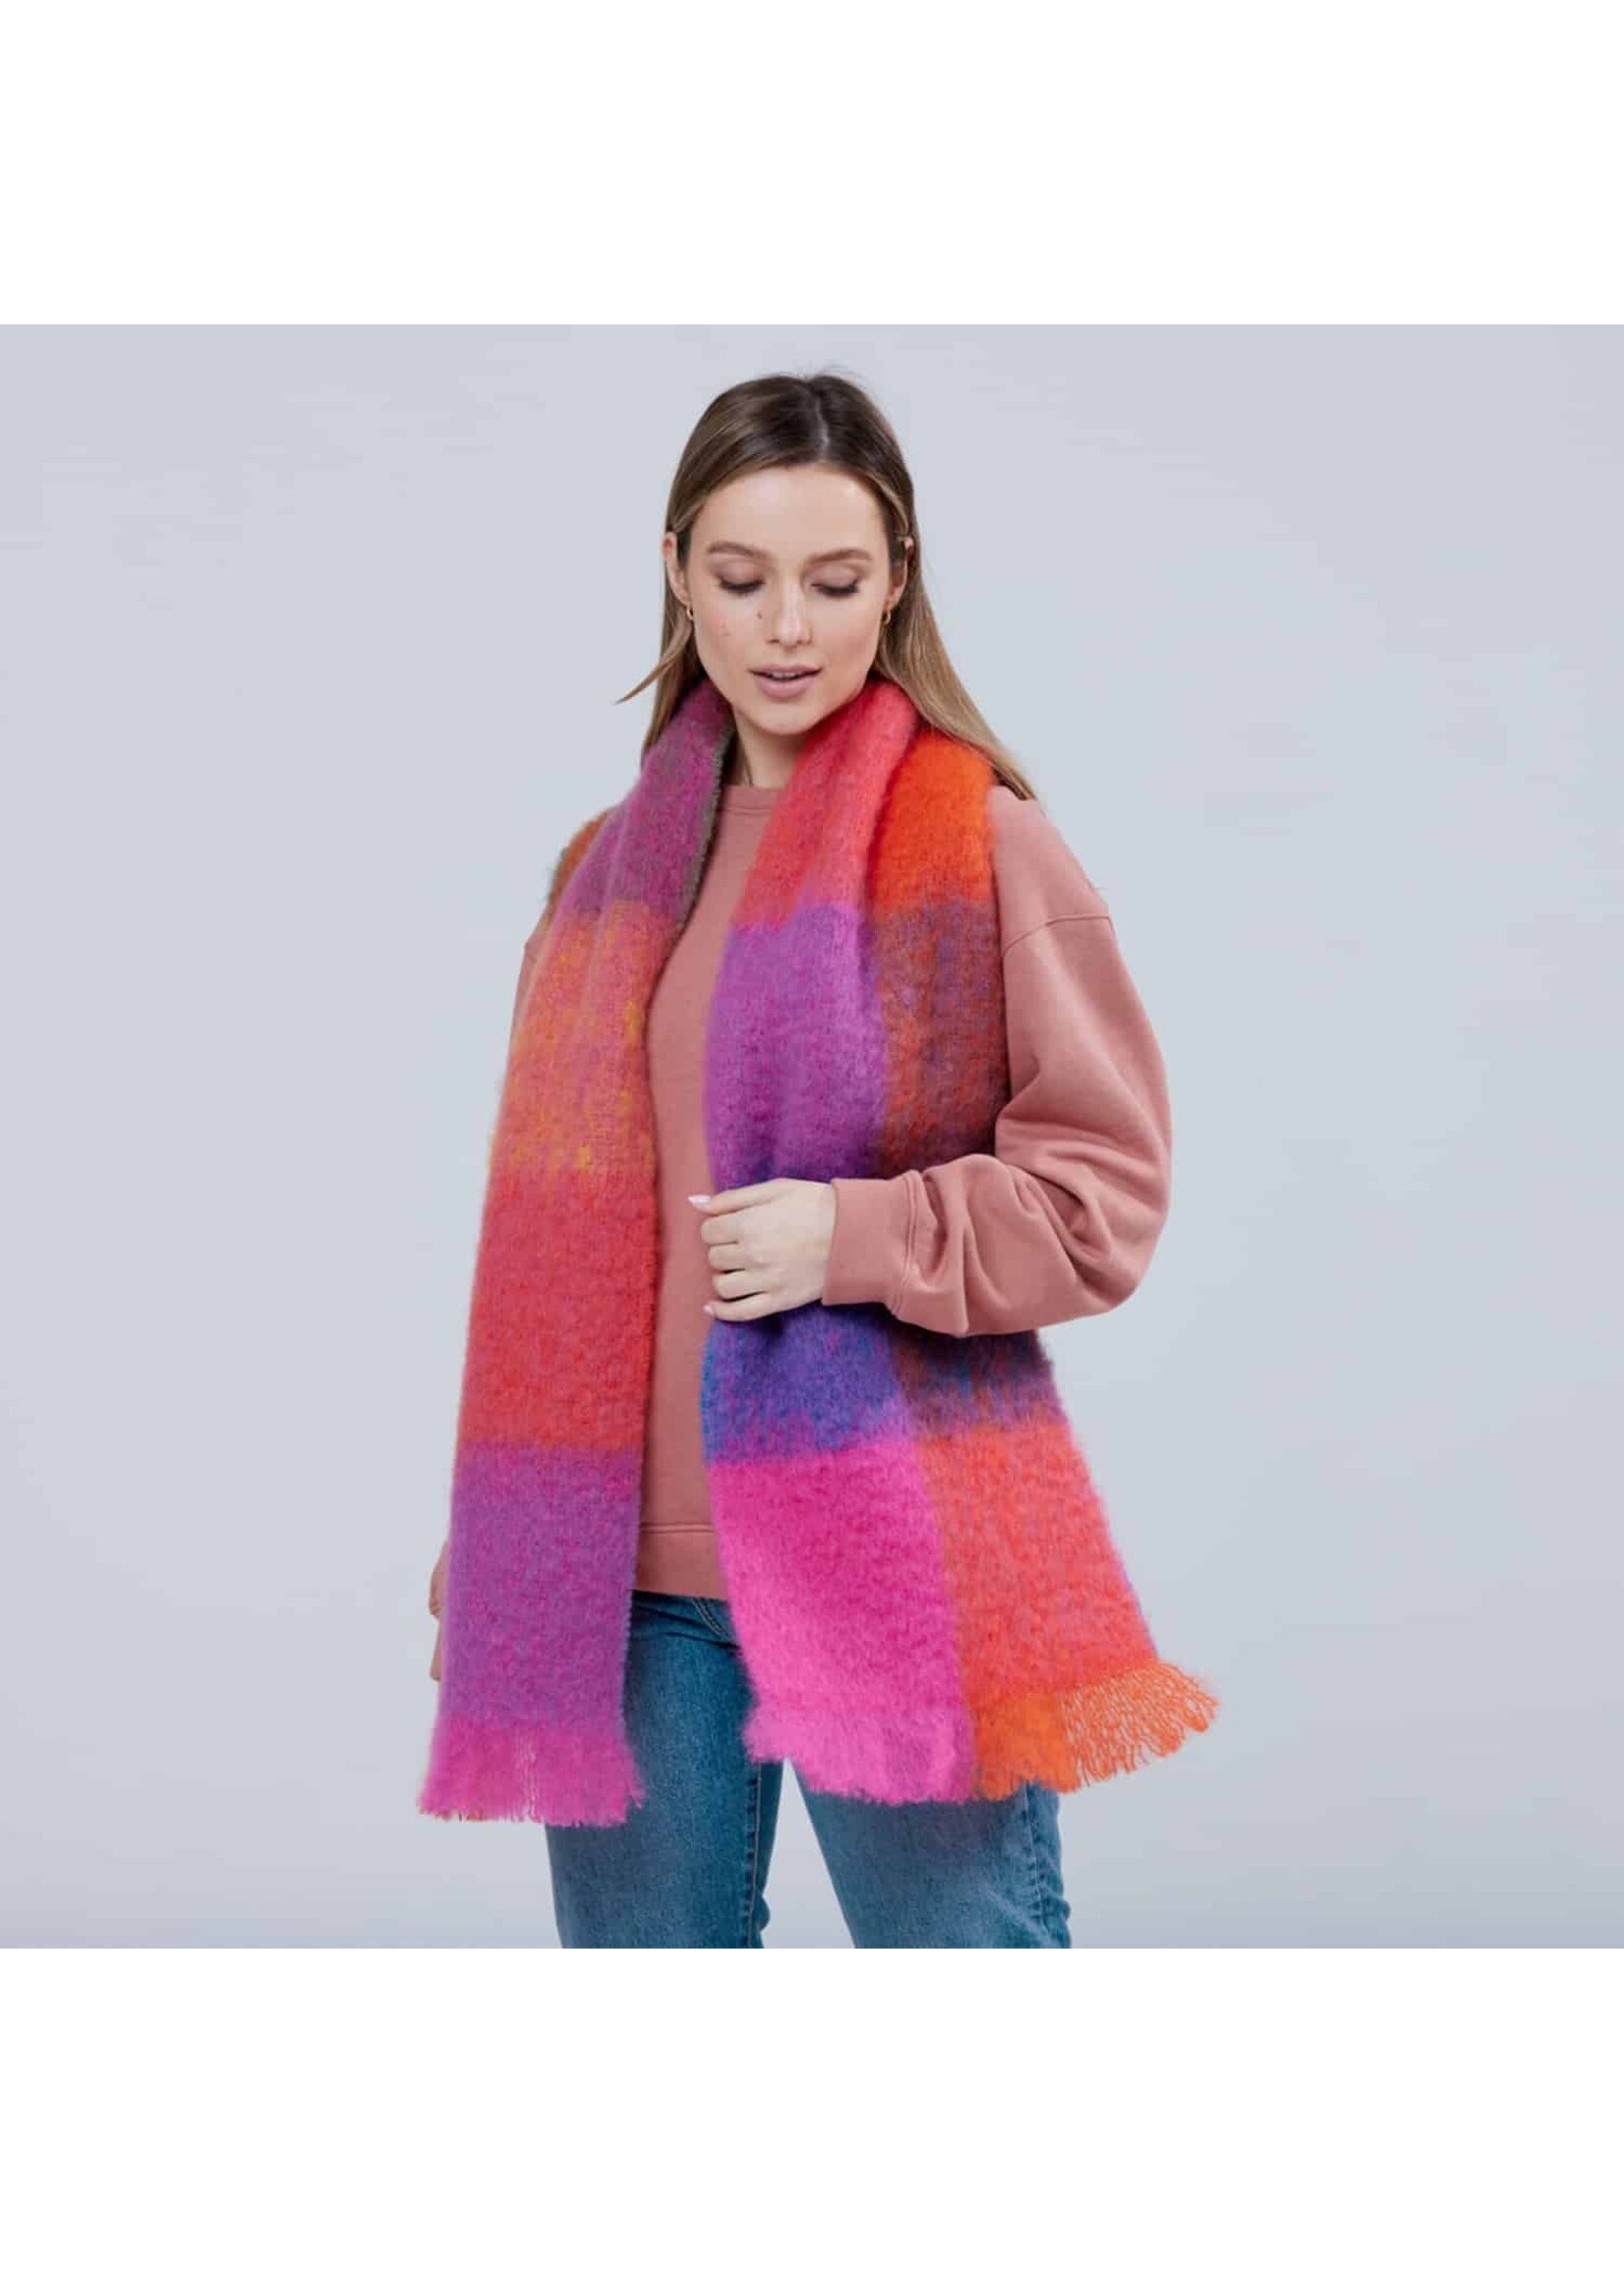 Foxford Mills Foxford Mohair Scarf Giant - Flame/Pink